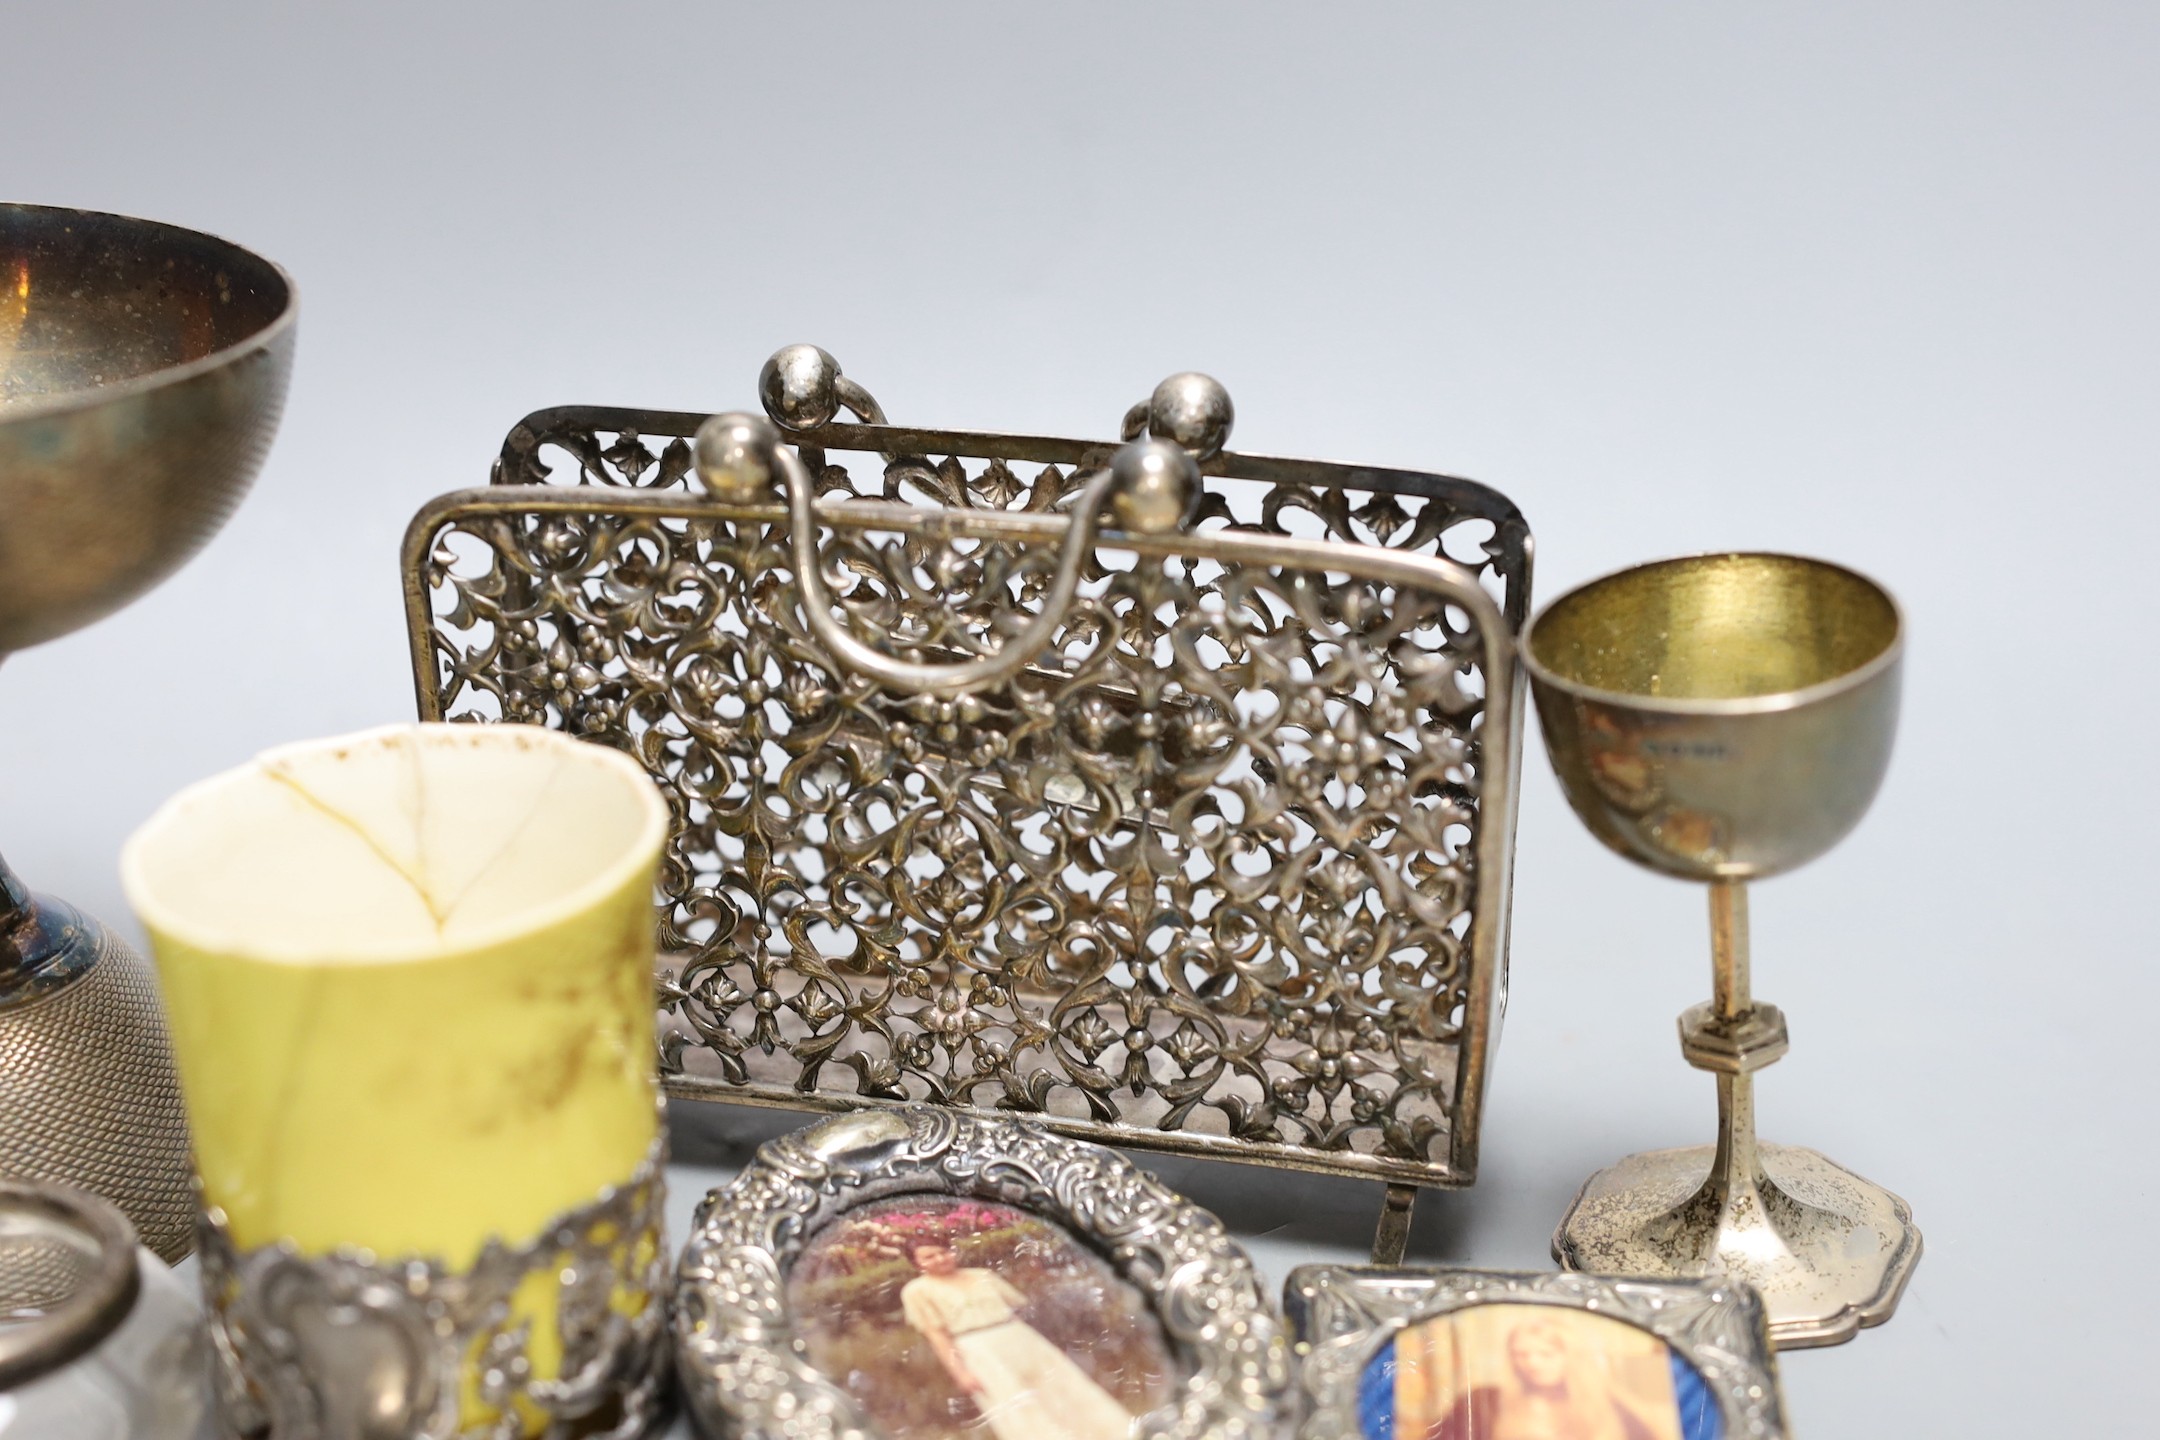 A small group of collectable items including a silver stationary rack, Laurence Emanuel, Birmingham, 1901, height 9.7cm, a silver communion goblet, silver mounted porcelain coffee cup, silver mounted glass vase, silver v